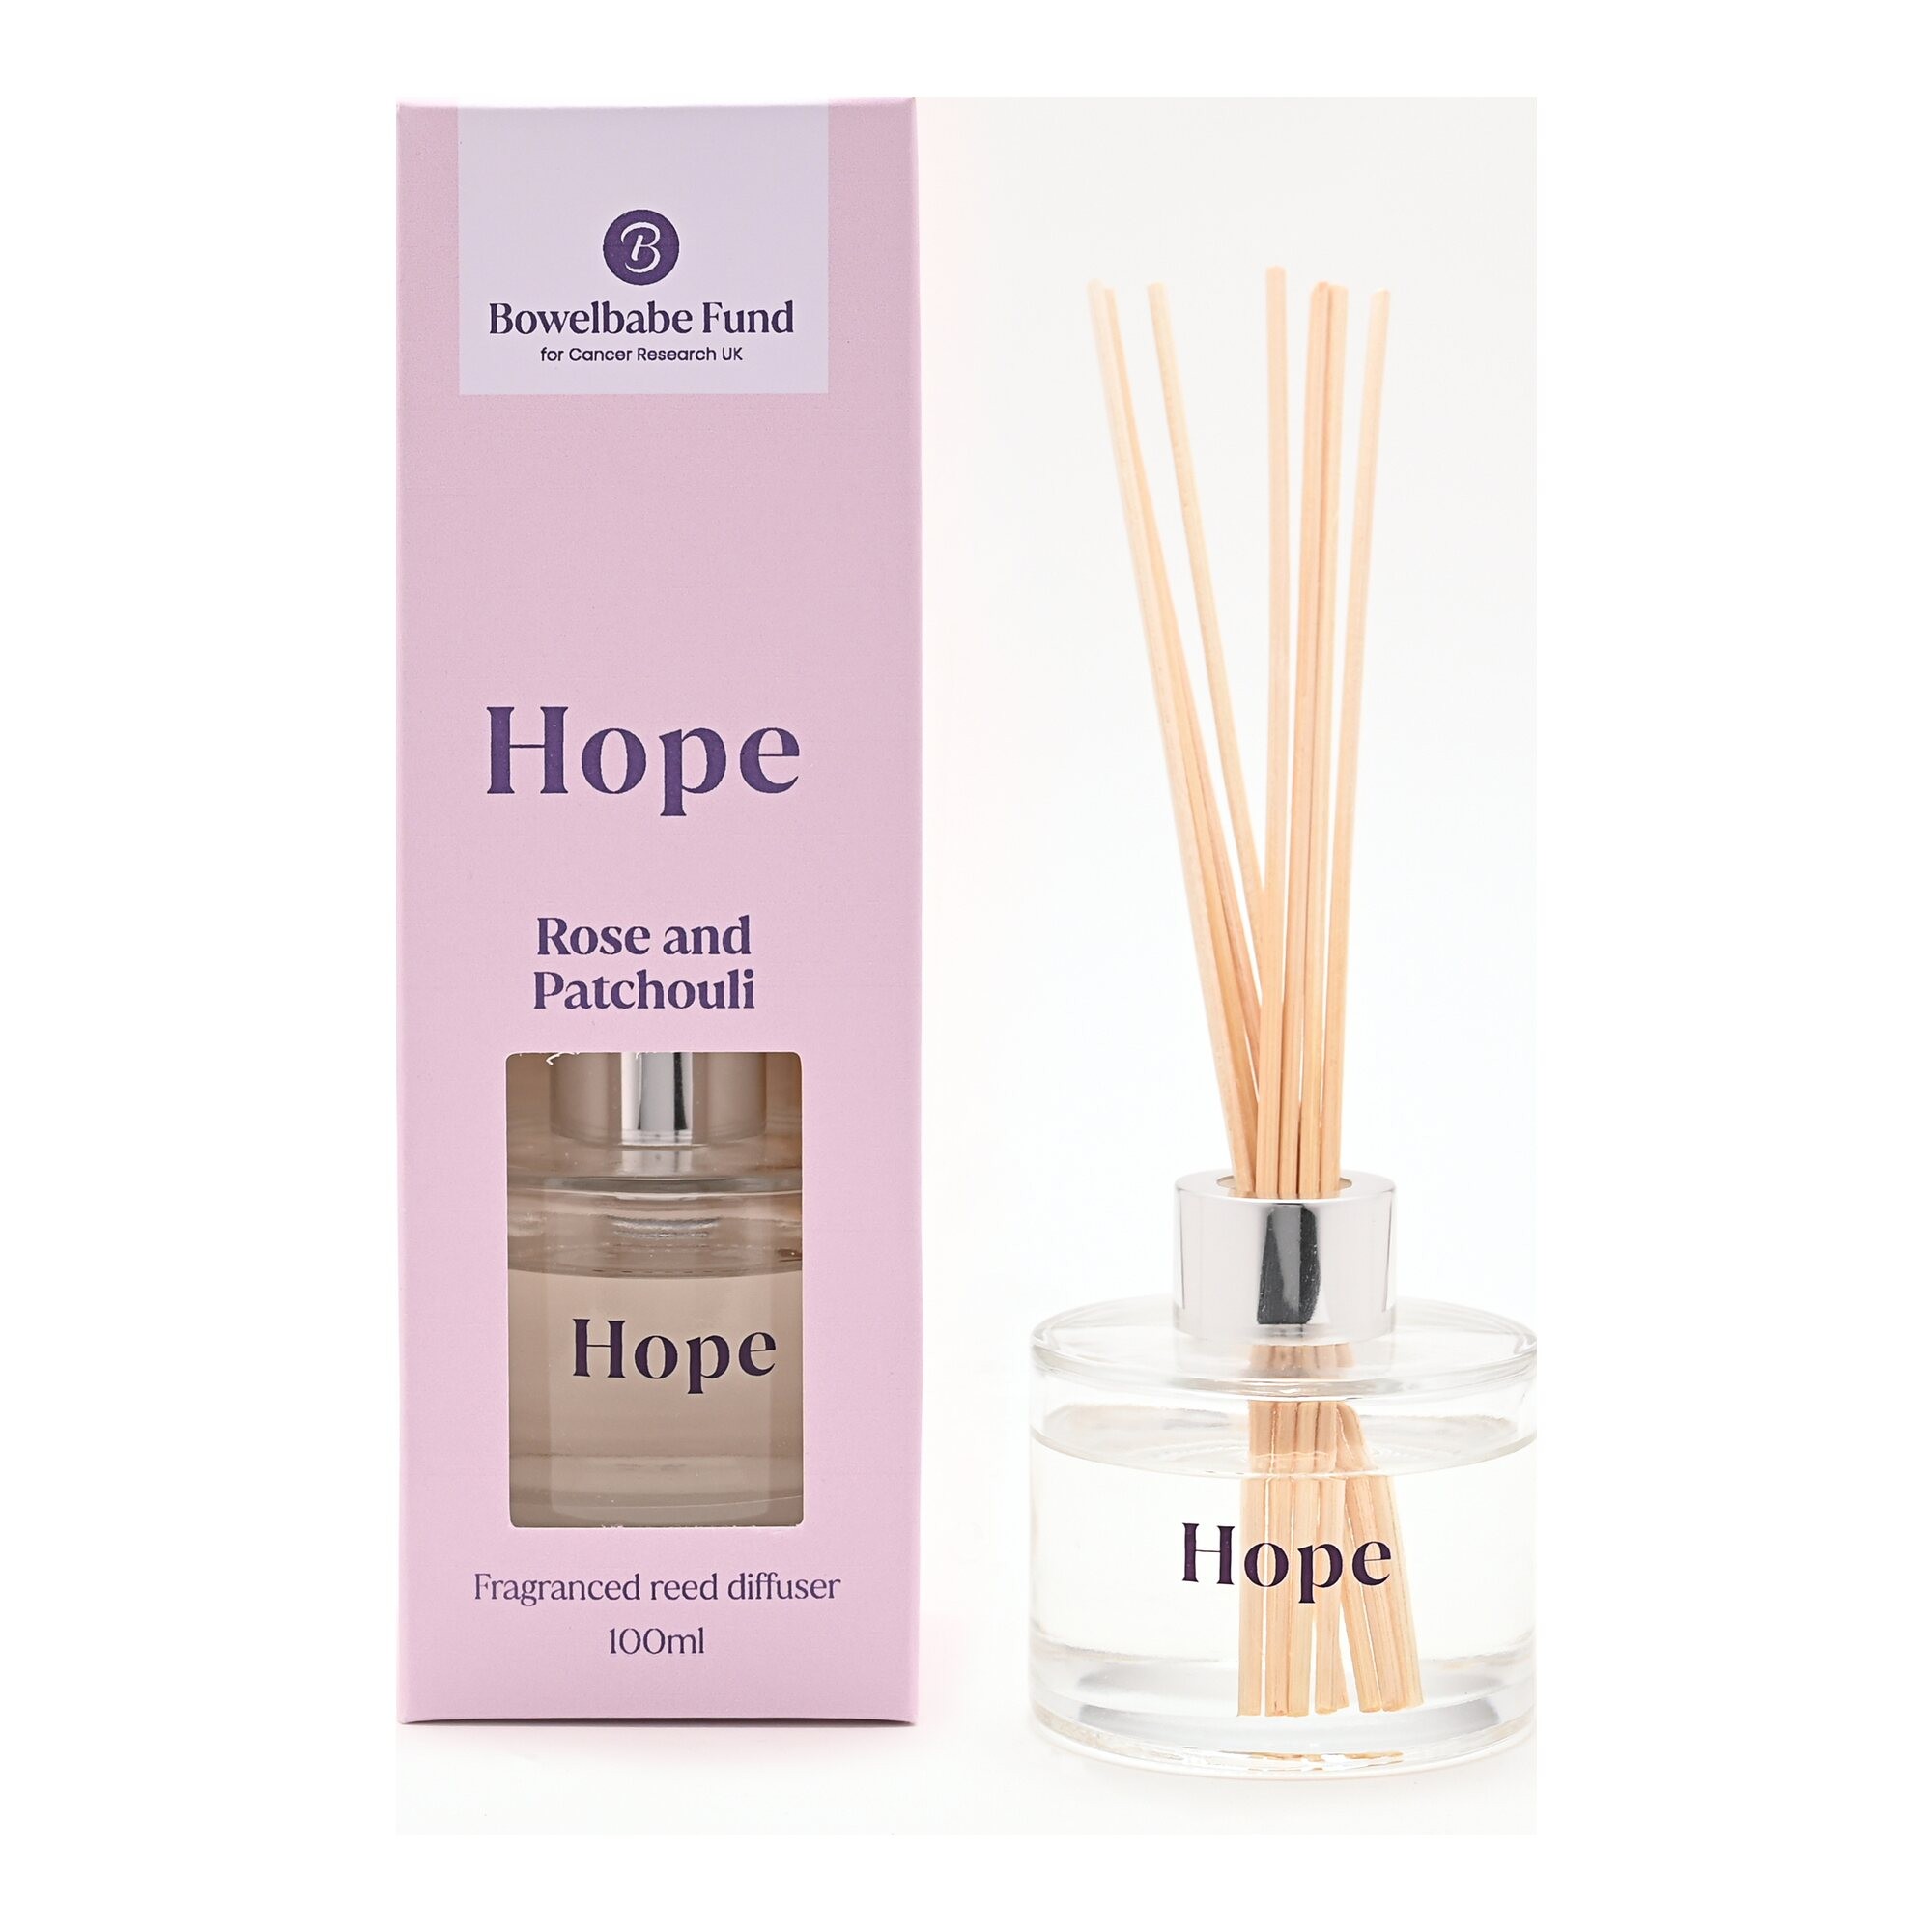 Bowelbabe Fund Hope Diffuser - Rose & Patchouli